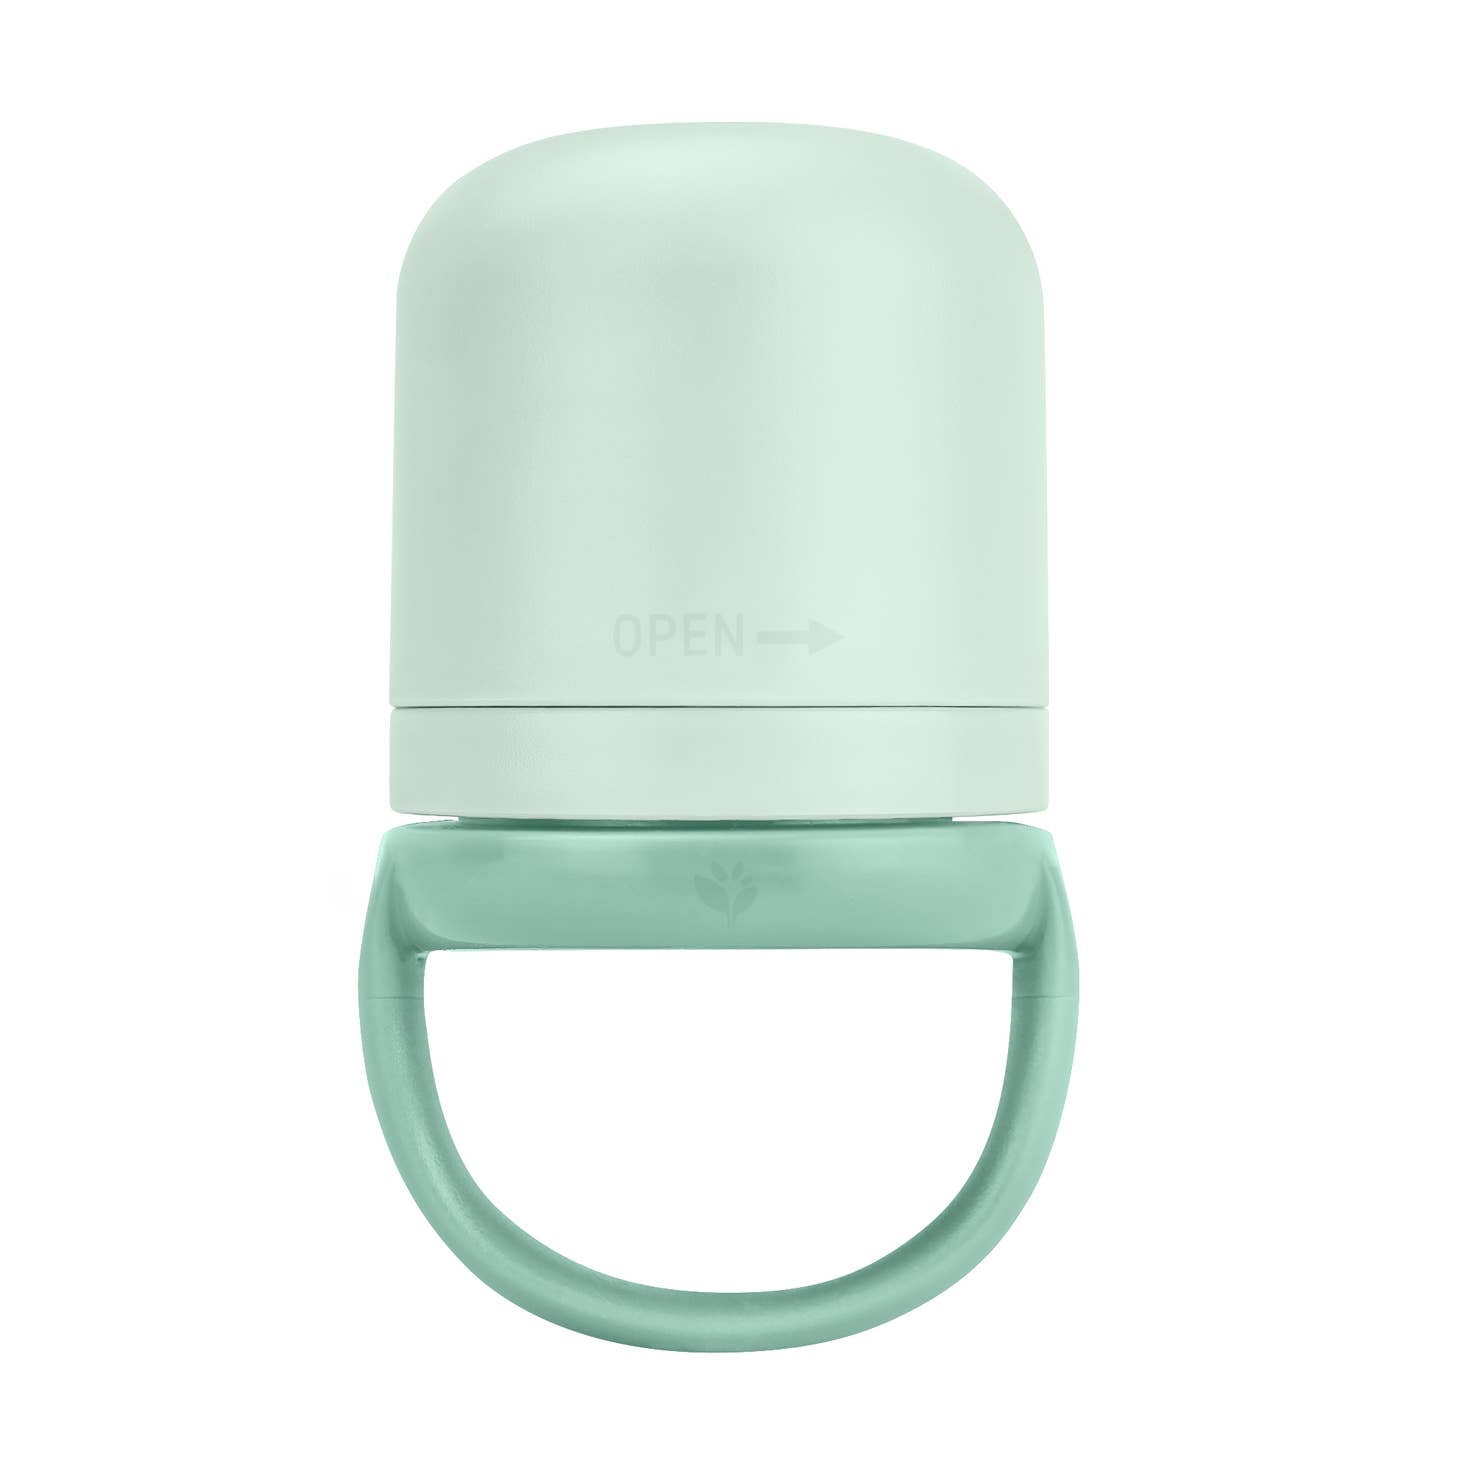 Green Sprouts First Foods Feeder - Mint